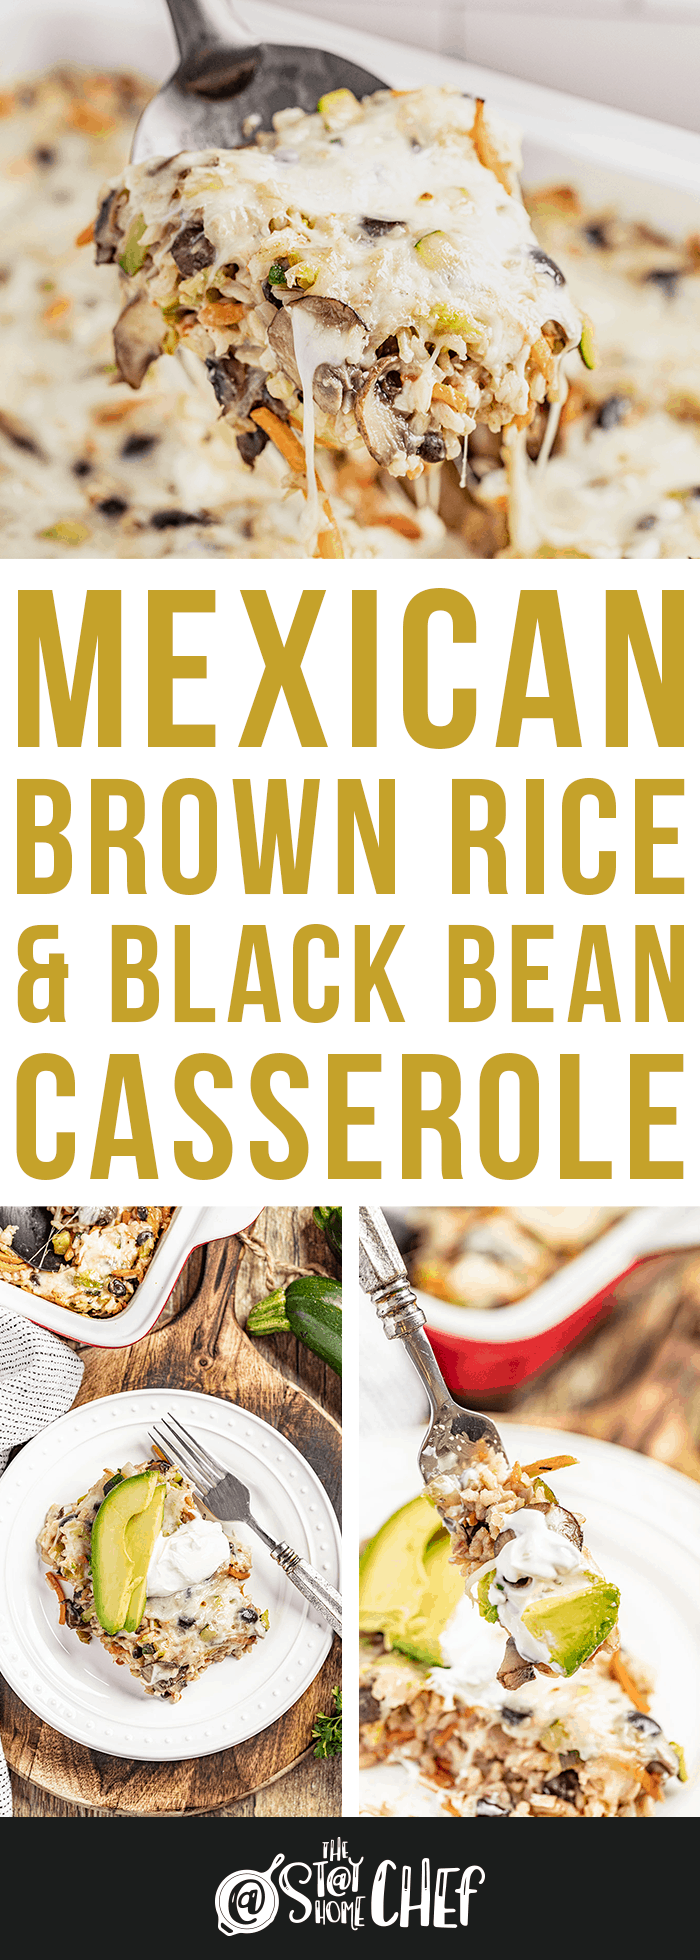 Mexican Brown Rice and Black Bean Casserole